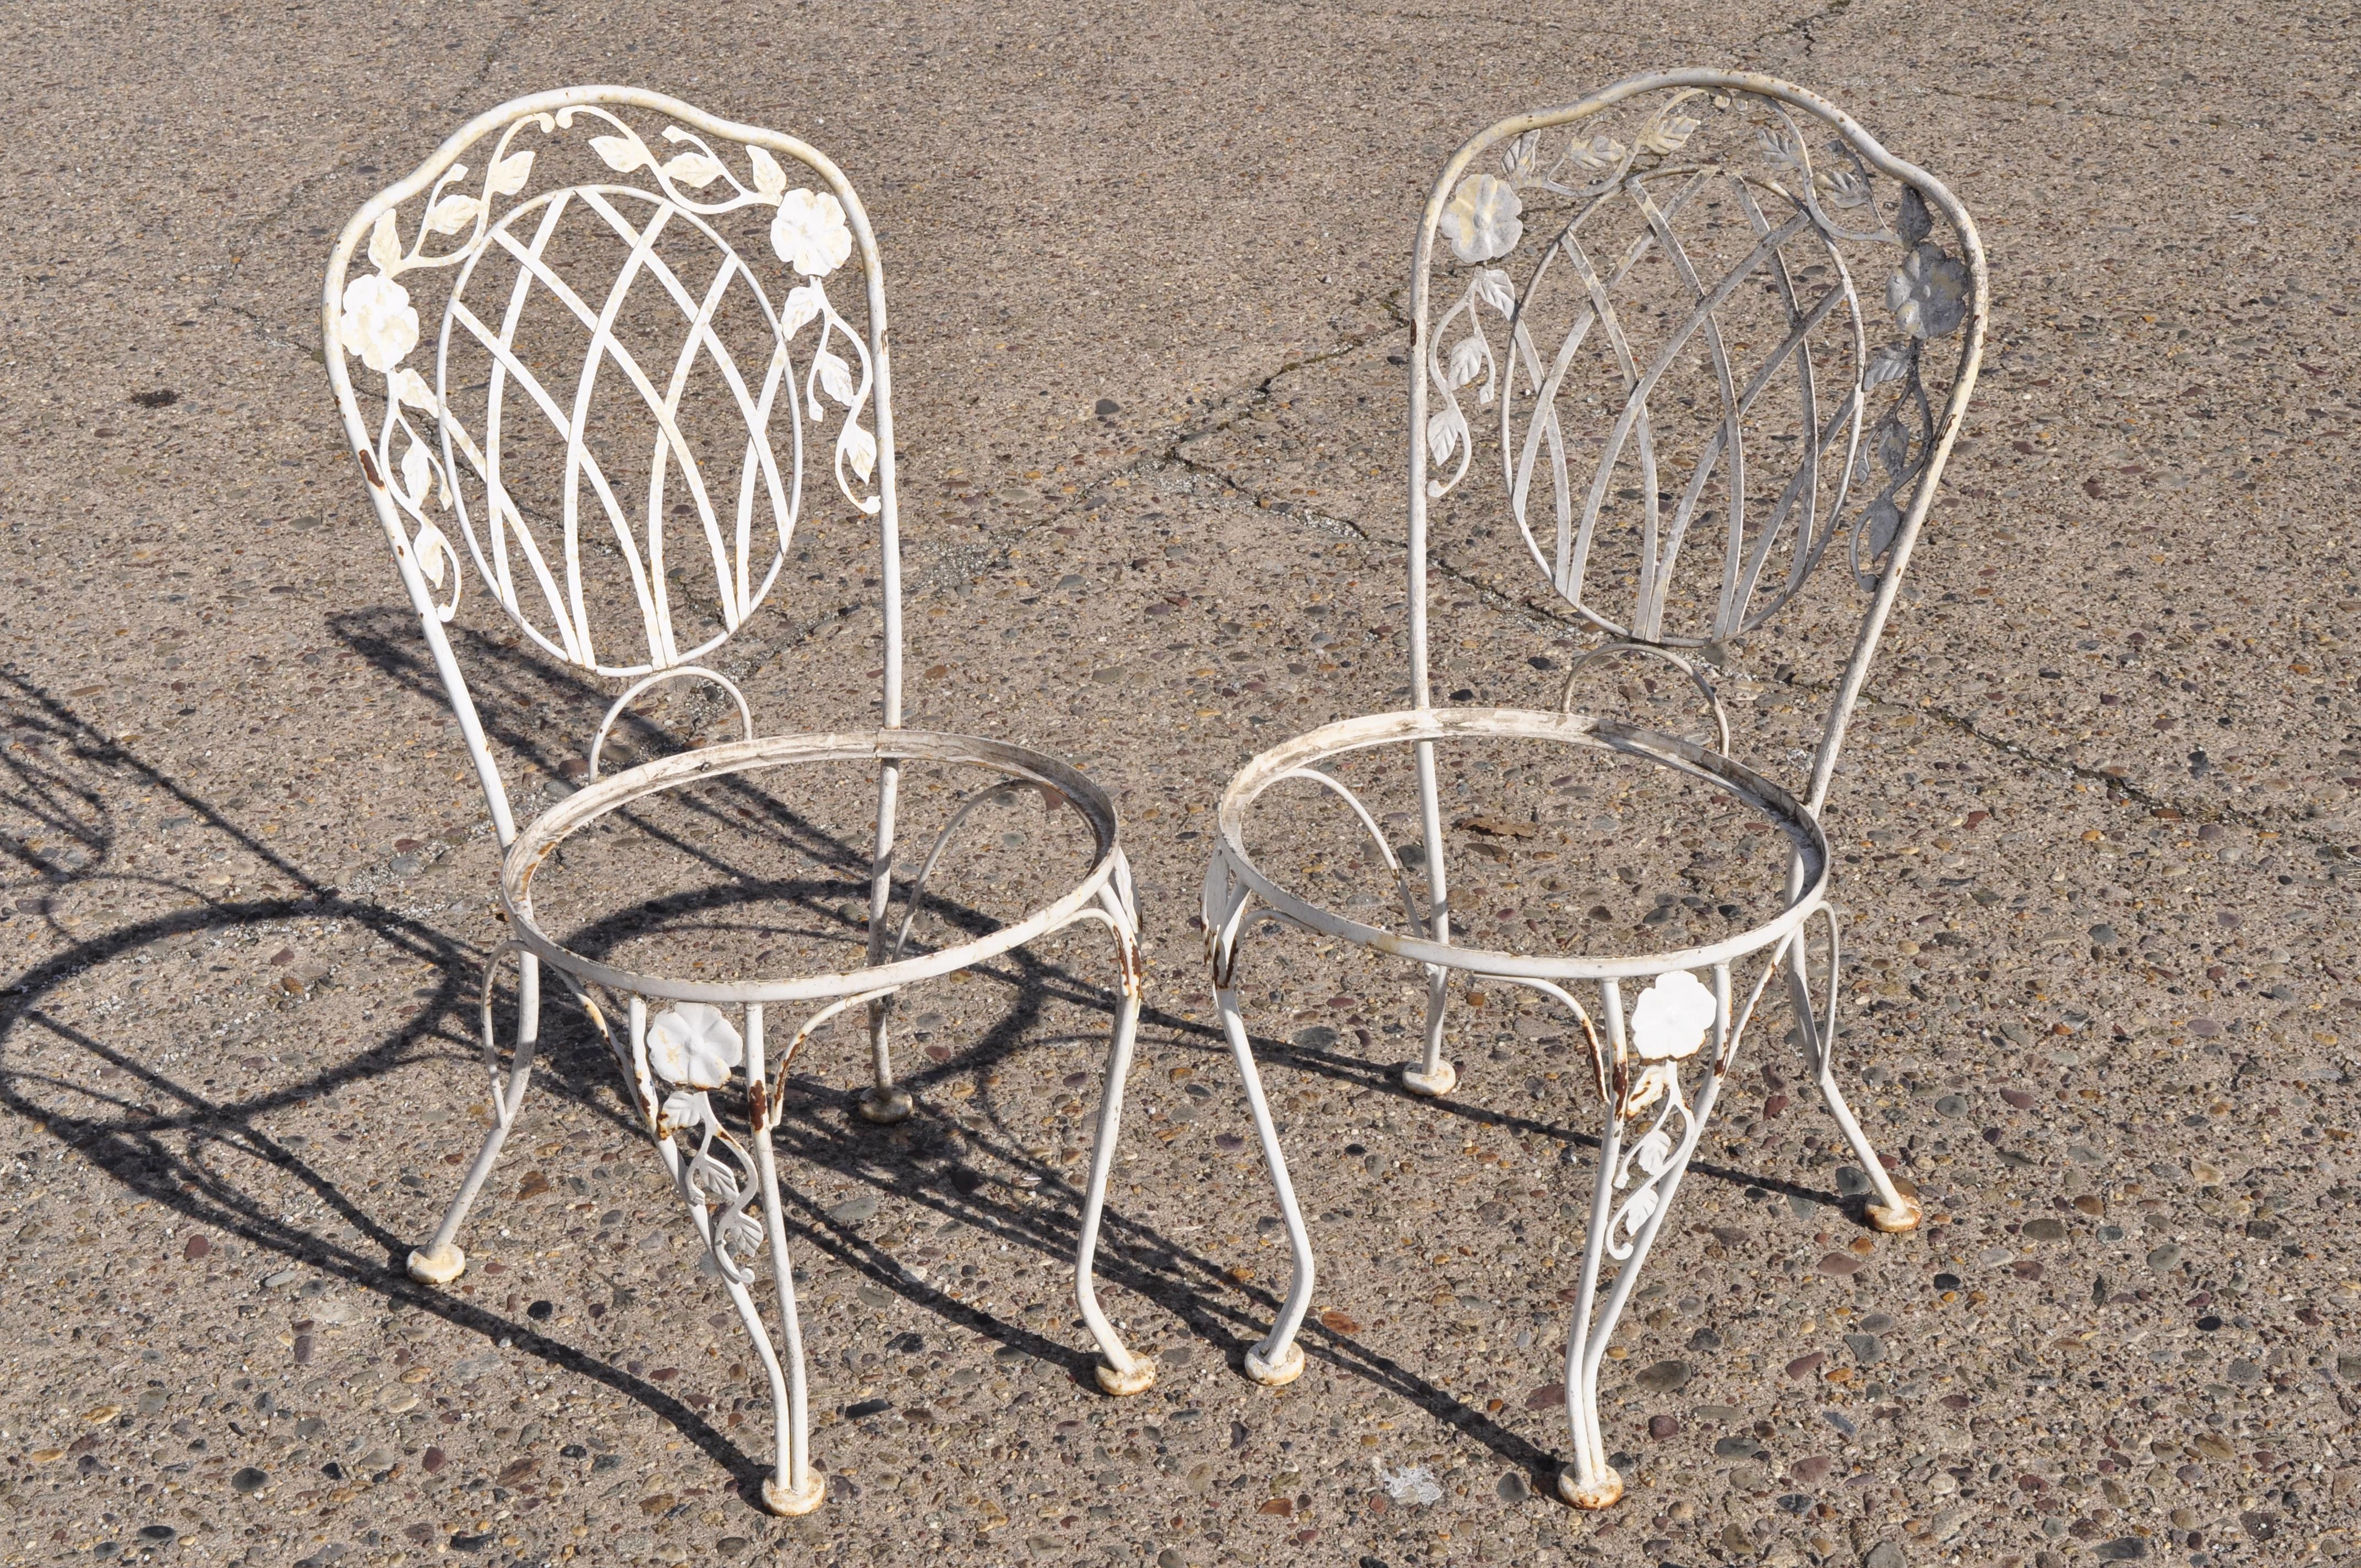 Vintage Lyon-Shaw Windflower Lattice Woodard style wrought iron garden dining set. Listing includes (4) dining side tables, small square glass top table with rounded corners, rippled glass, round seats, wrought iron construction, very nice vintage